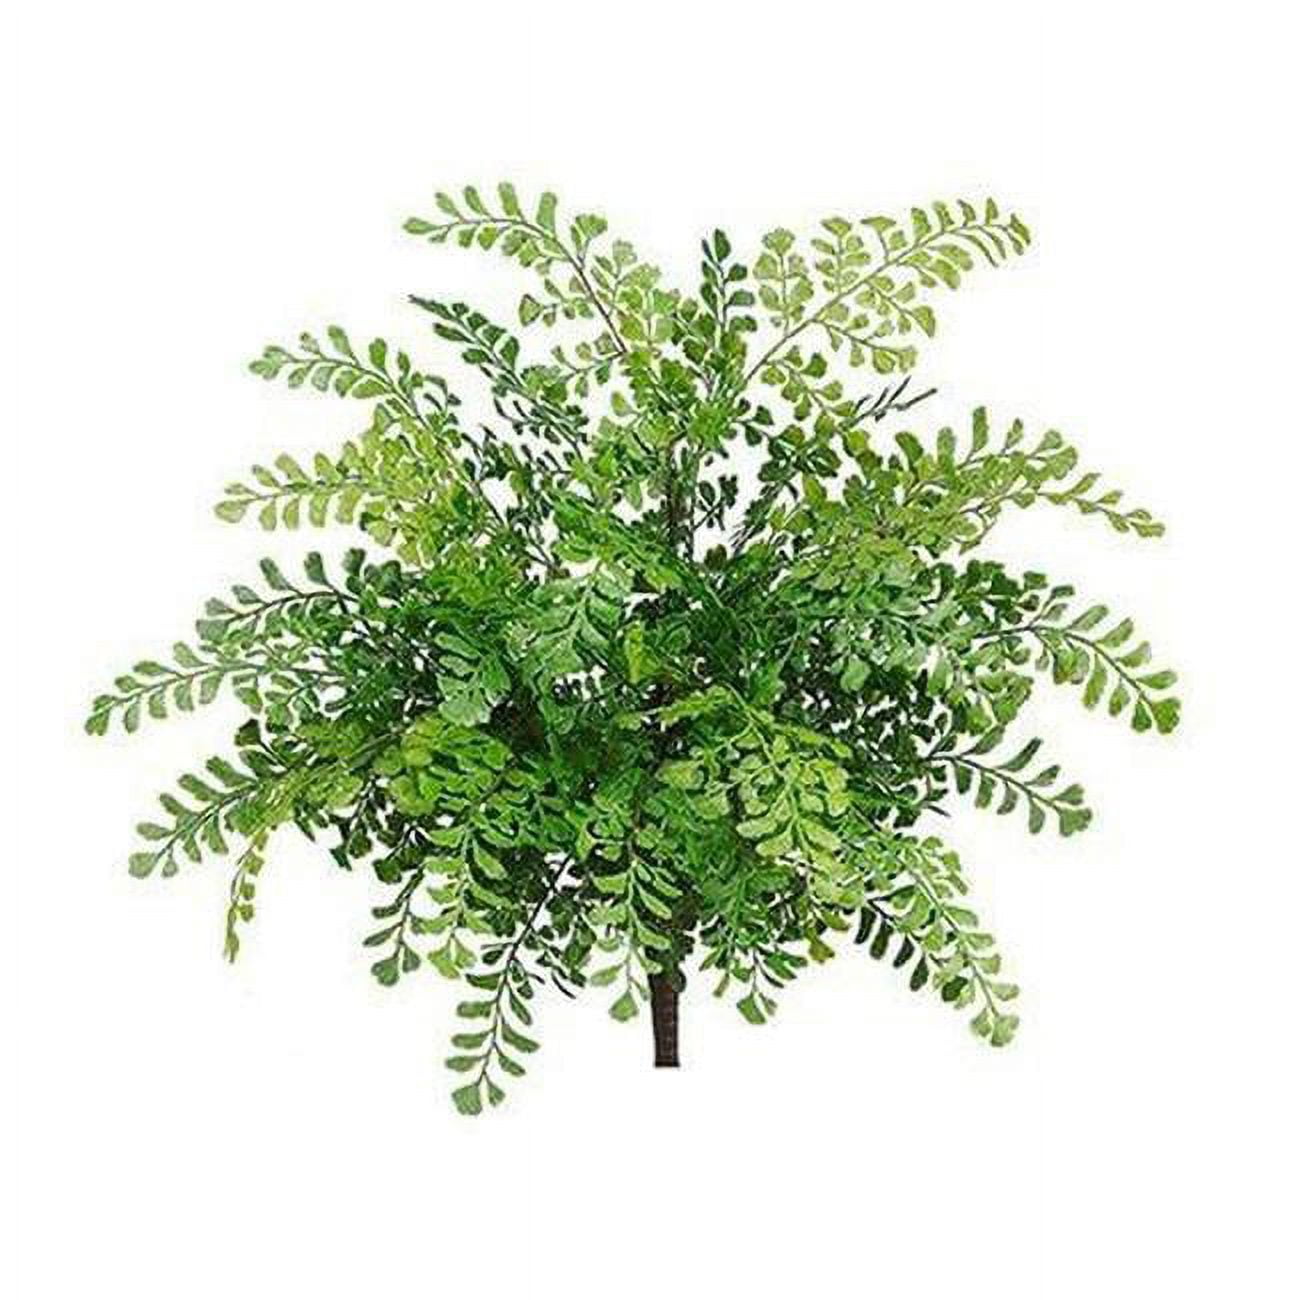 Picture of AllState Floral PBF419-GR 19 in. UV Protected Maidenhair Fern Bush - Green - Pack of 12